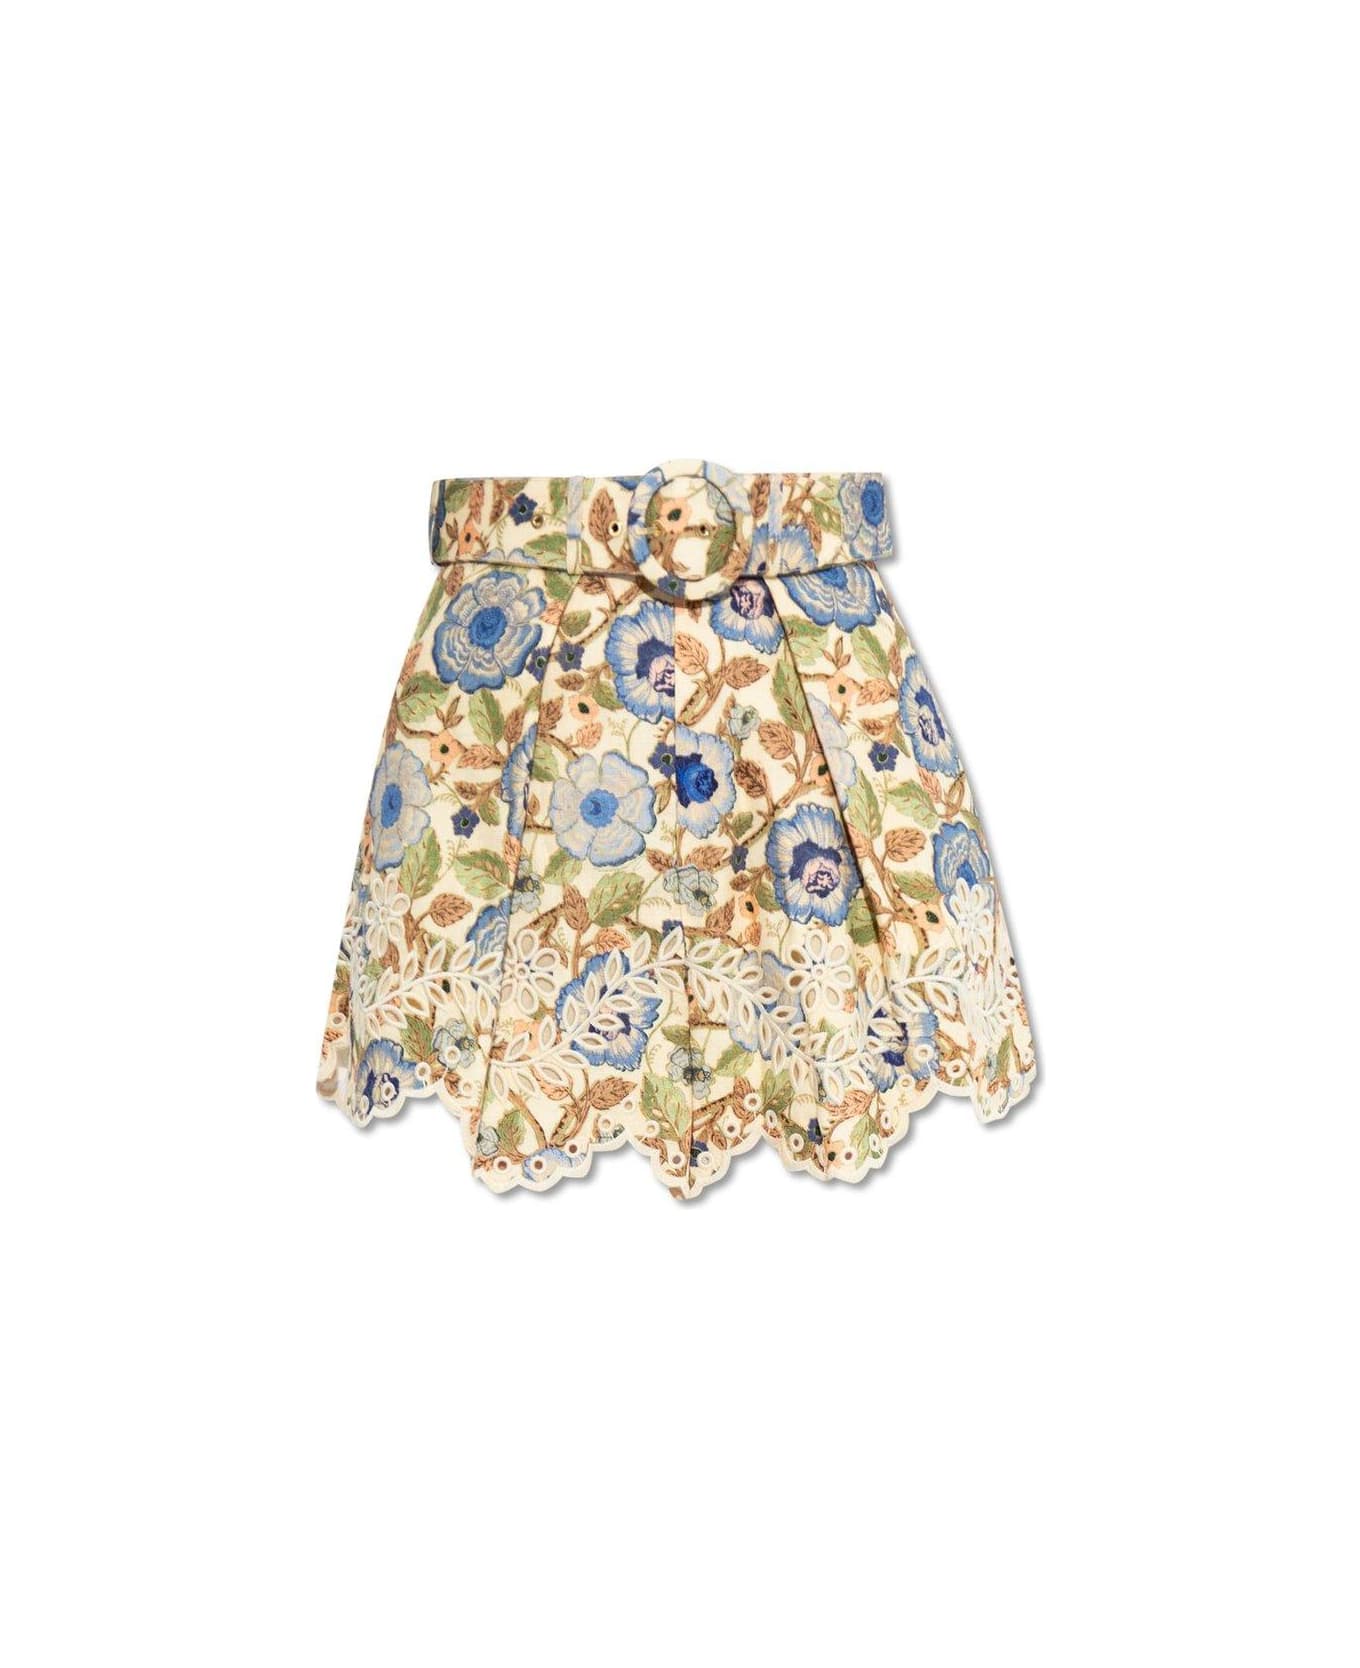 Zimmermann Junie Embroidered Shorts - Ivobf Ivory Blue Floral ショートパンツ